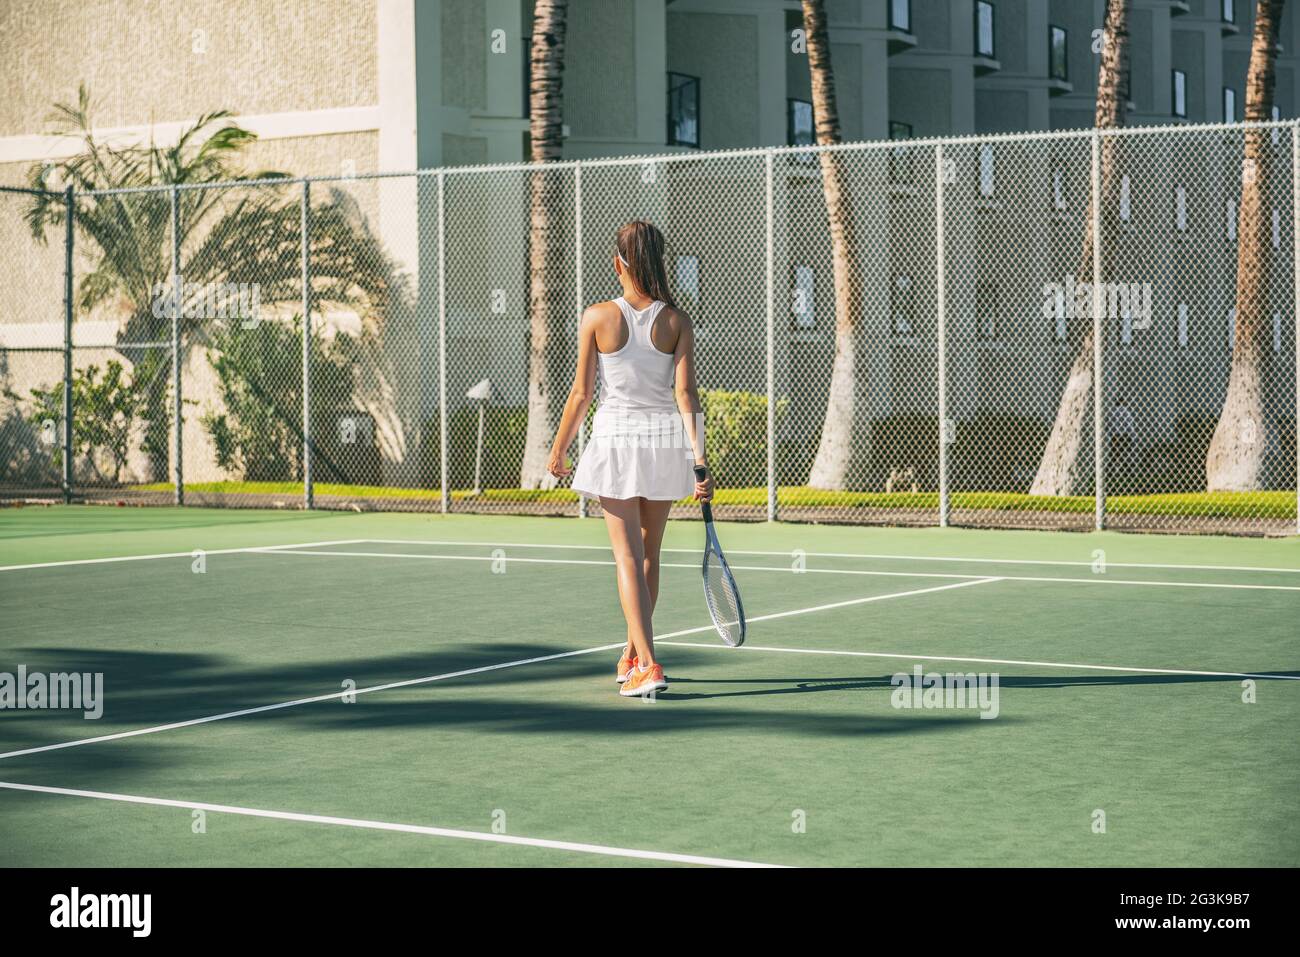 Tennis player woman playing on green hard court at resort hotel outside wearing white tennis dress outfit from behind. Stock Photo